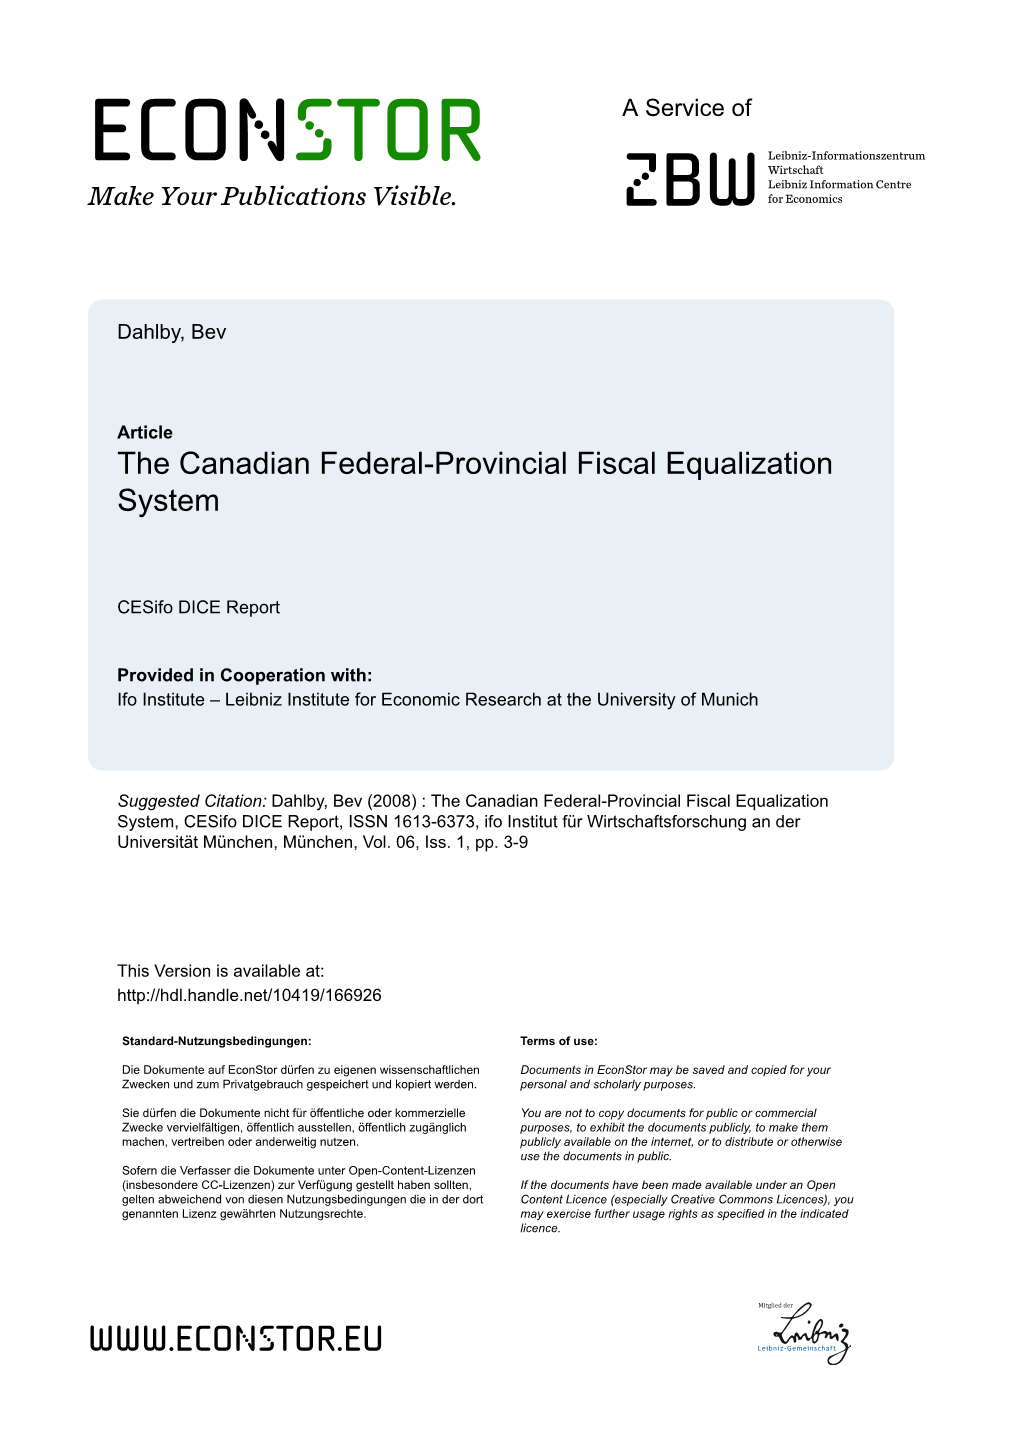 The Canadian Federal-Provincial Fiscal Equalization System